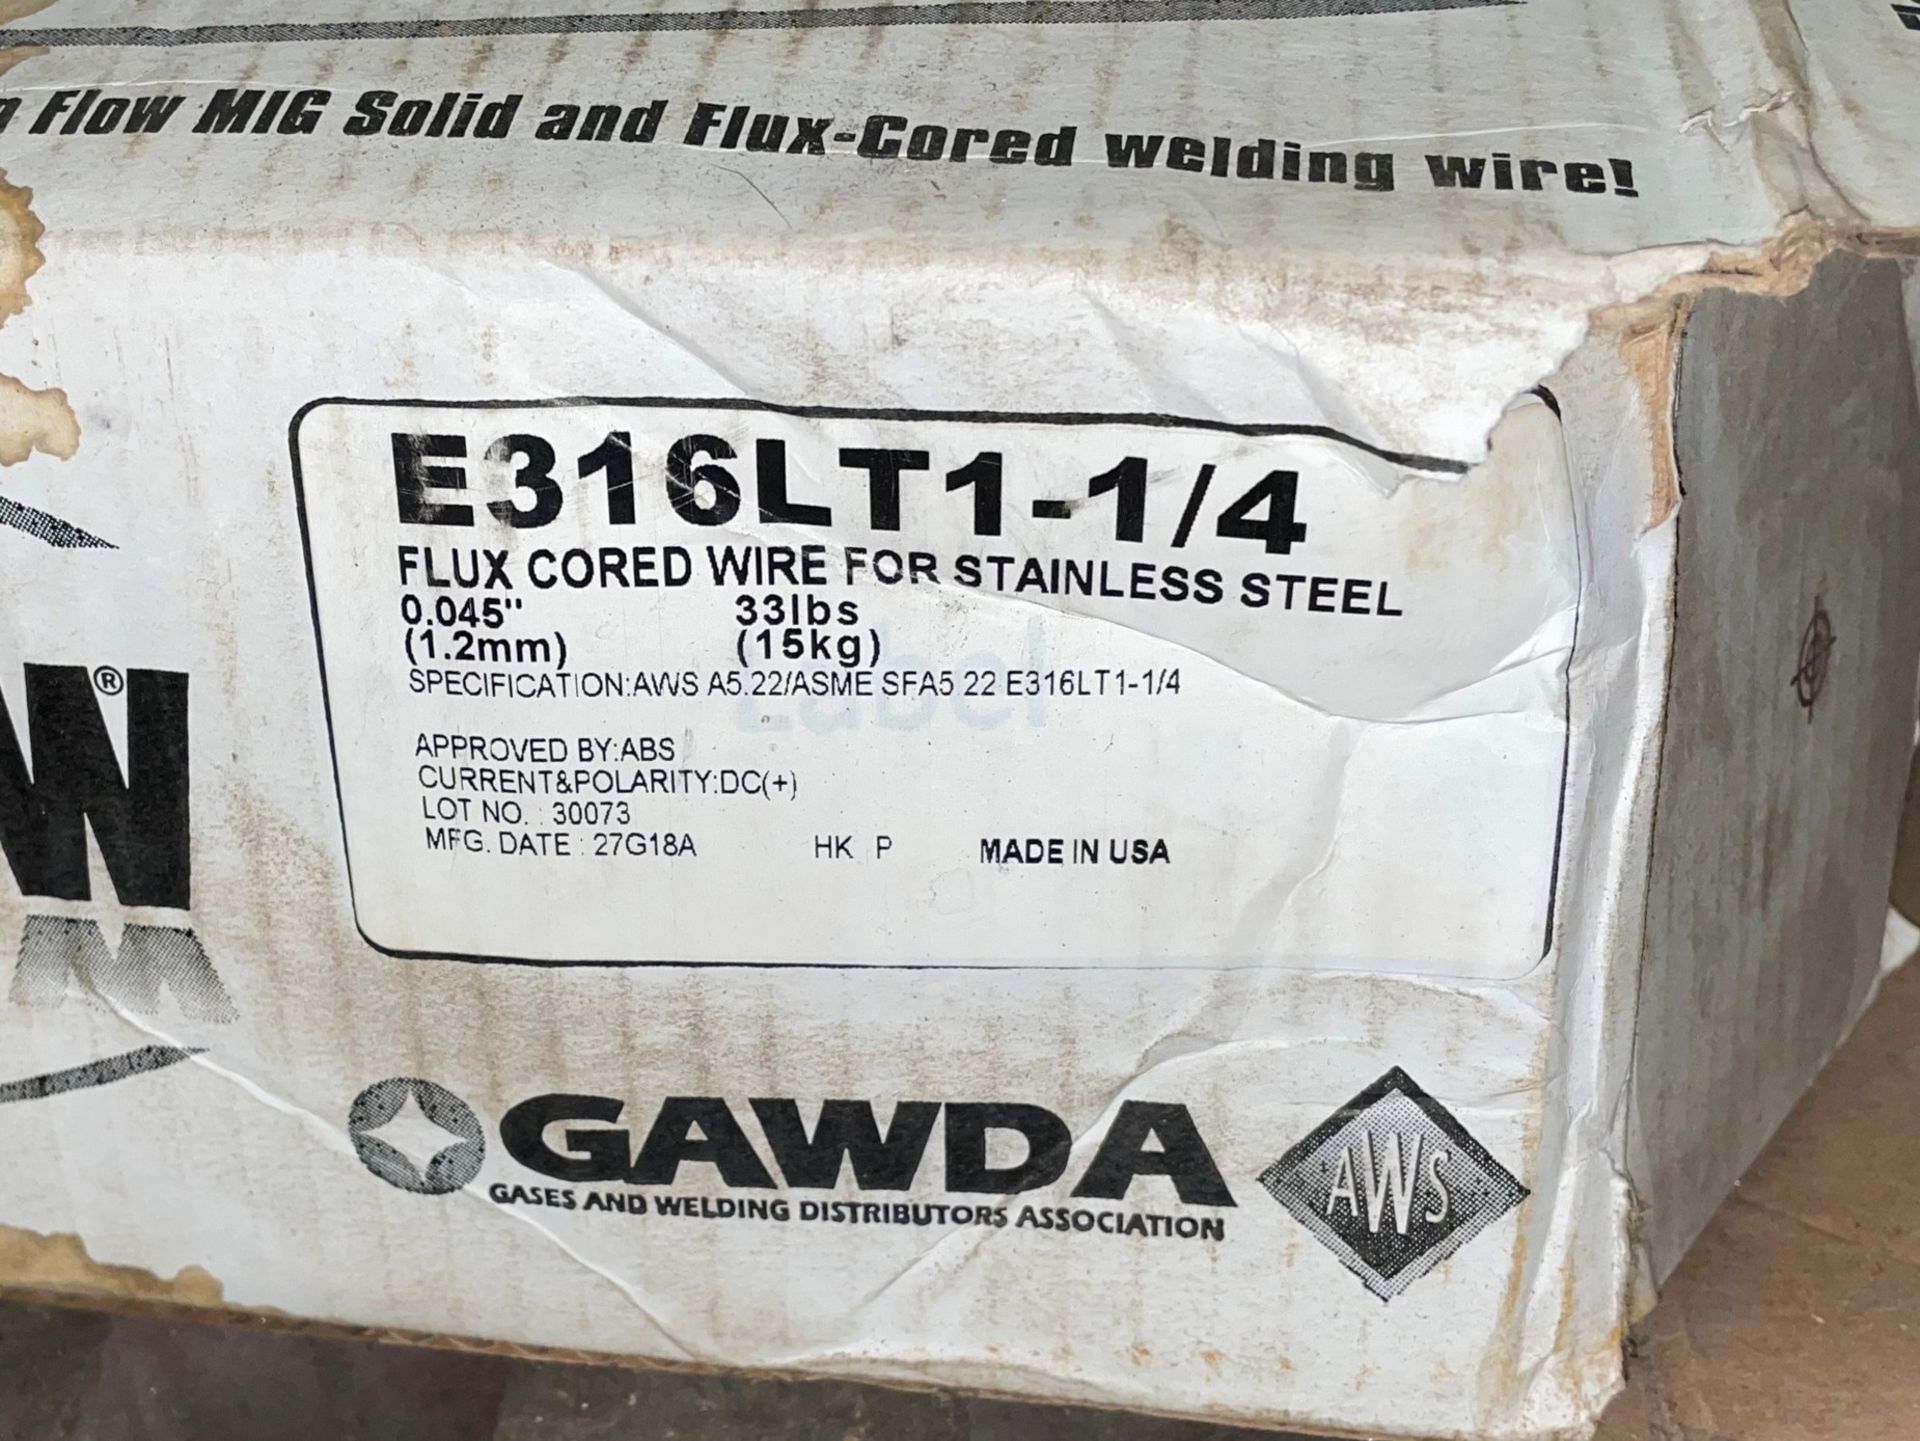 InWeld Fusion Flow Flux Cored Stainless Steel 0.045" Welding Wire - Image 2 of 3